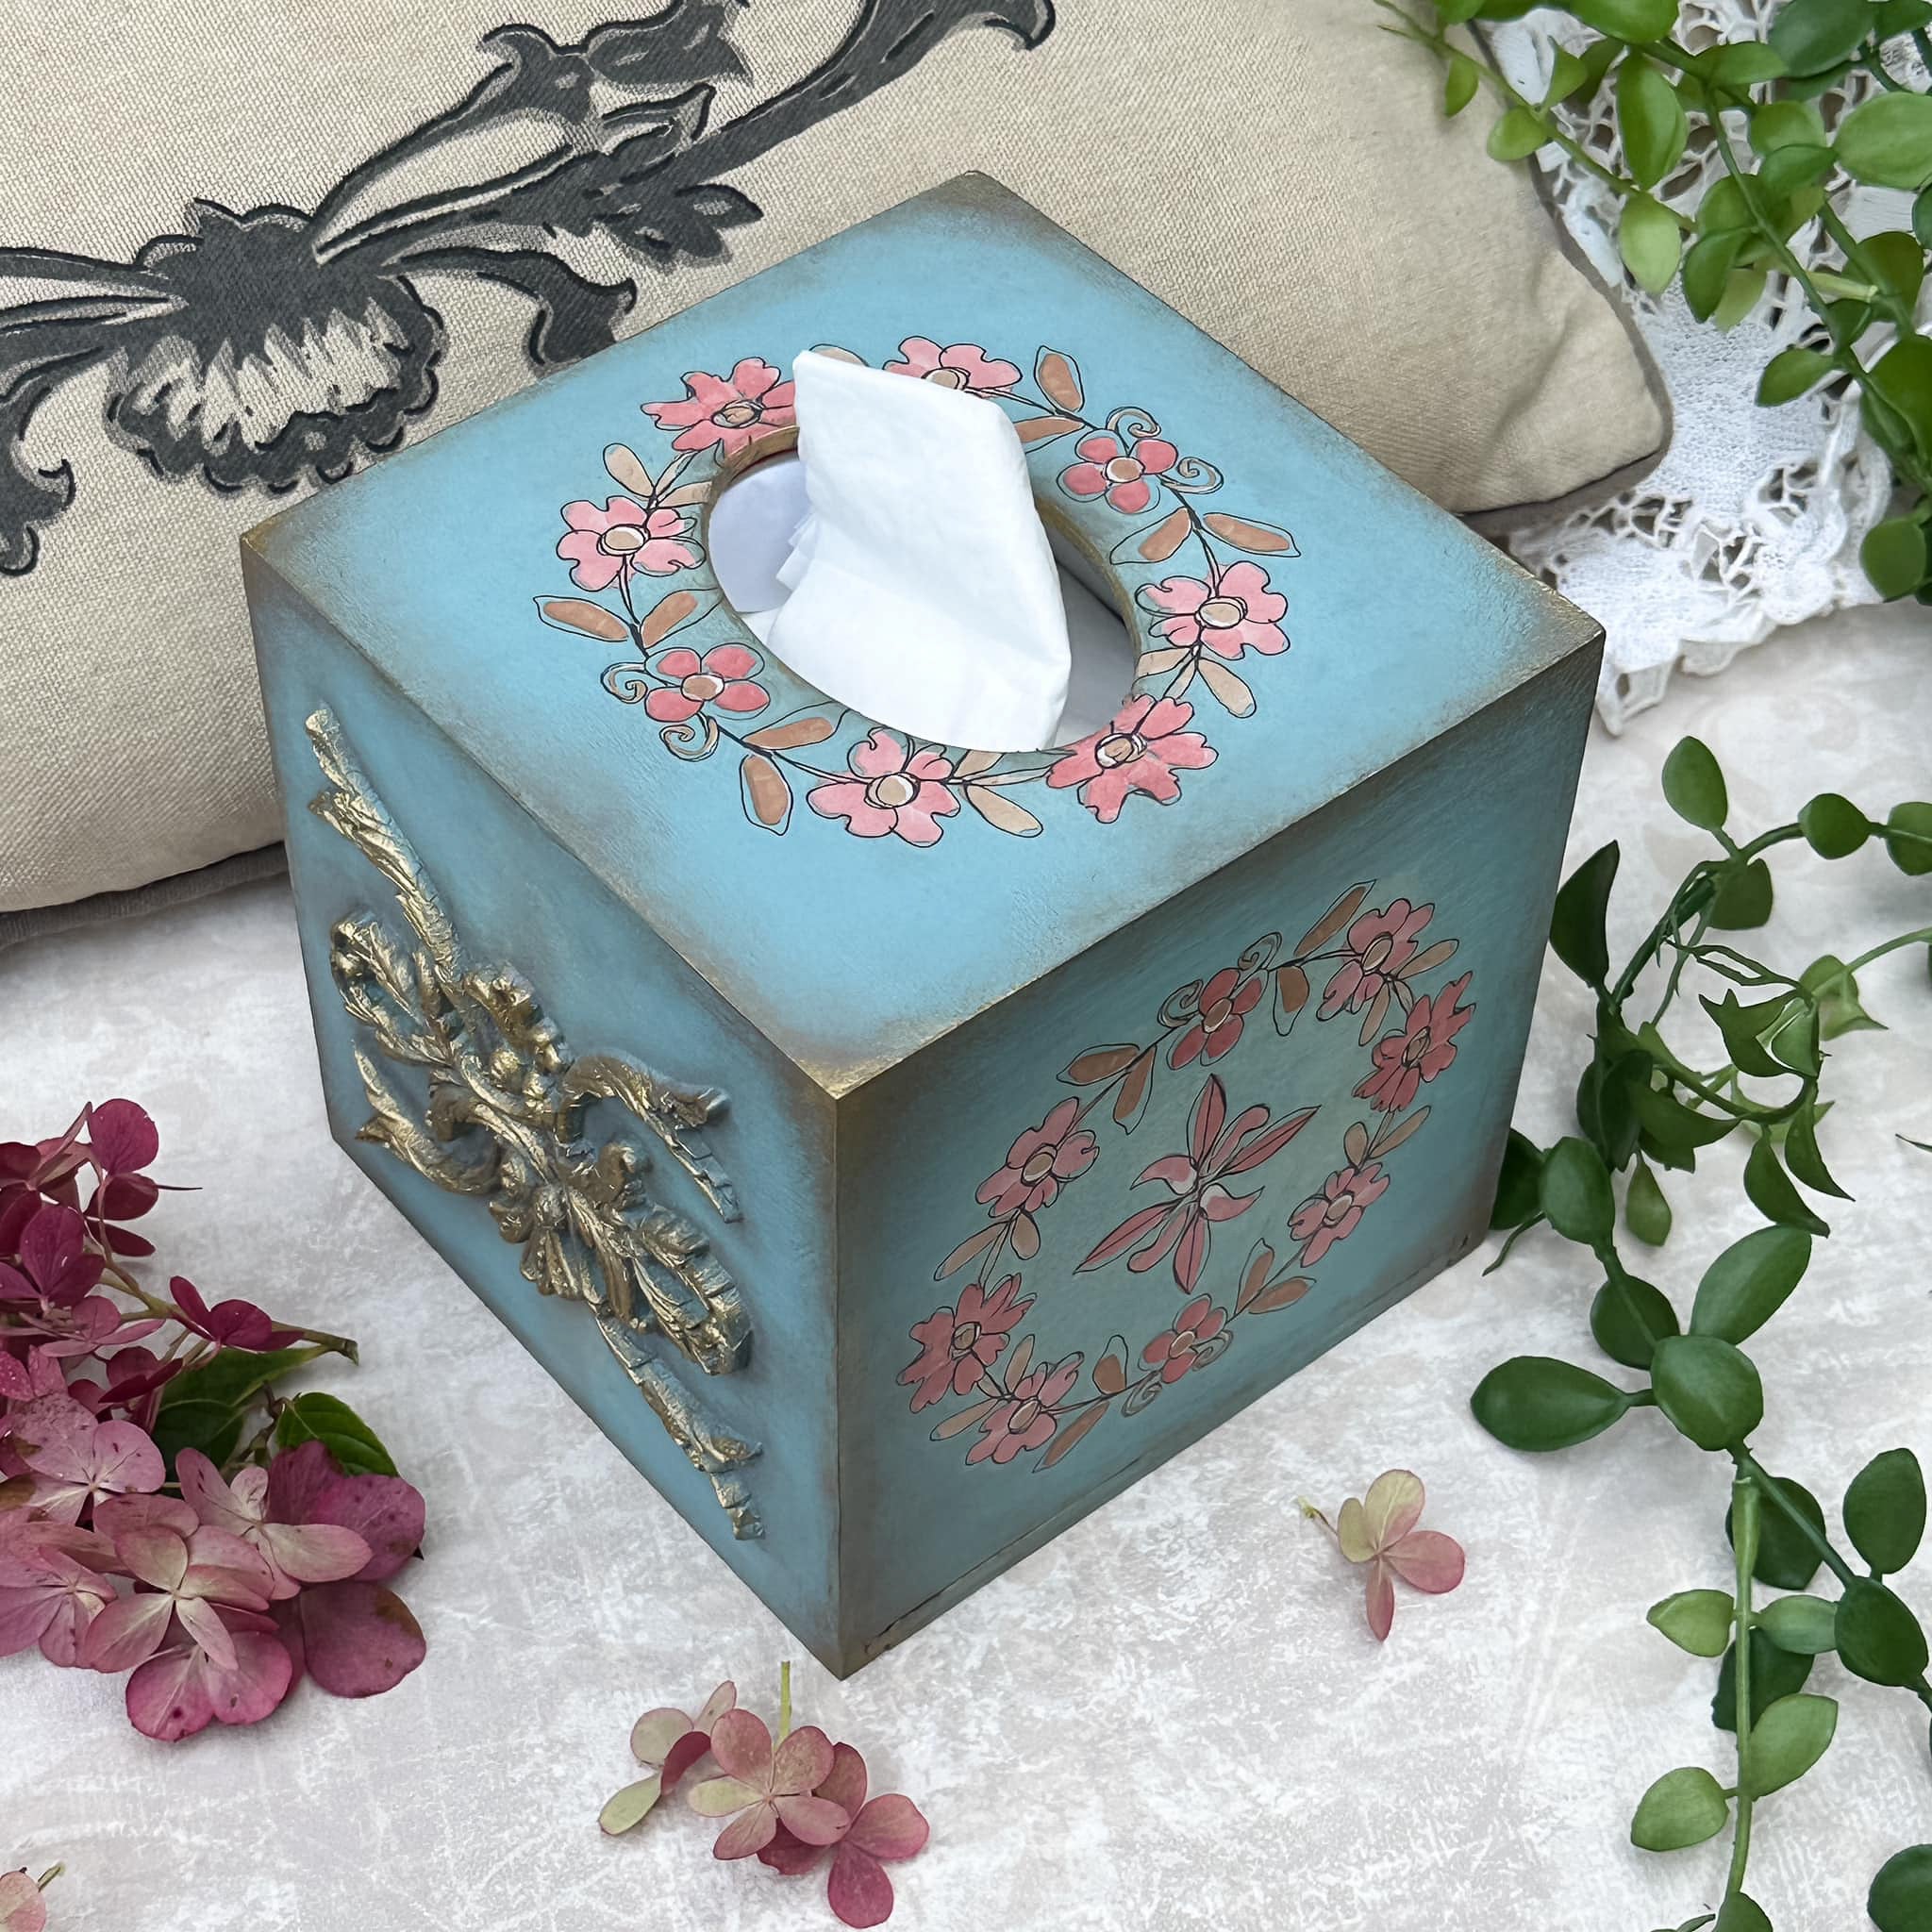 A wooden tissue box is painted pale blue and features ReDesign with Prima's Annie Sloan Flower Garland rub-on transfer on it.